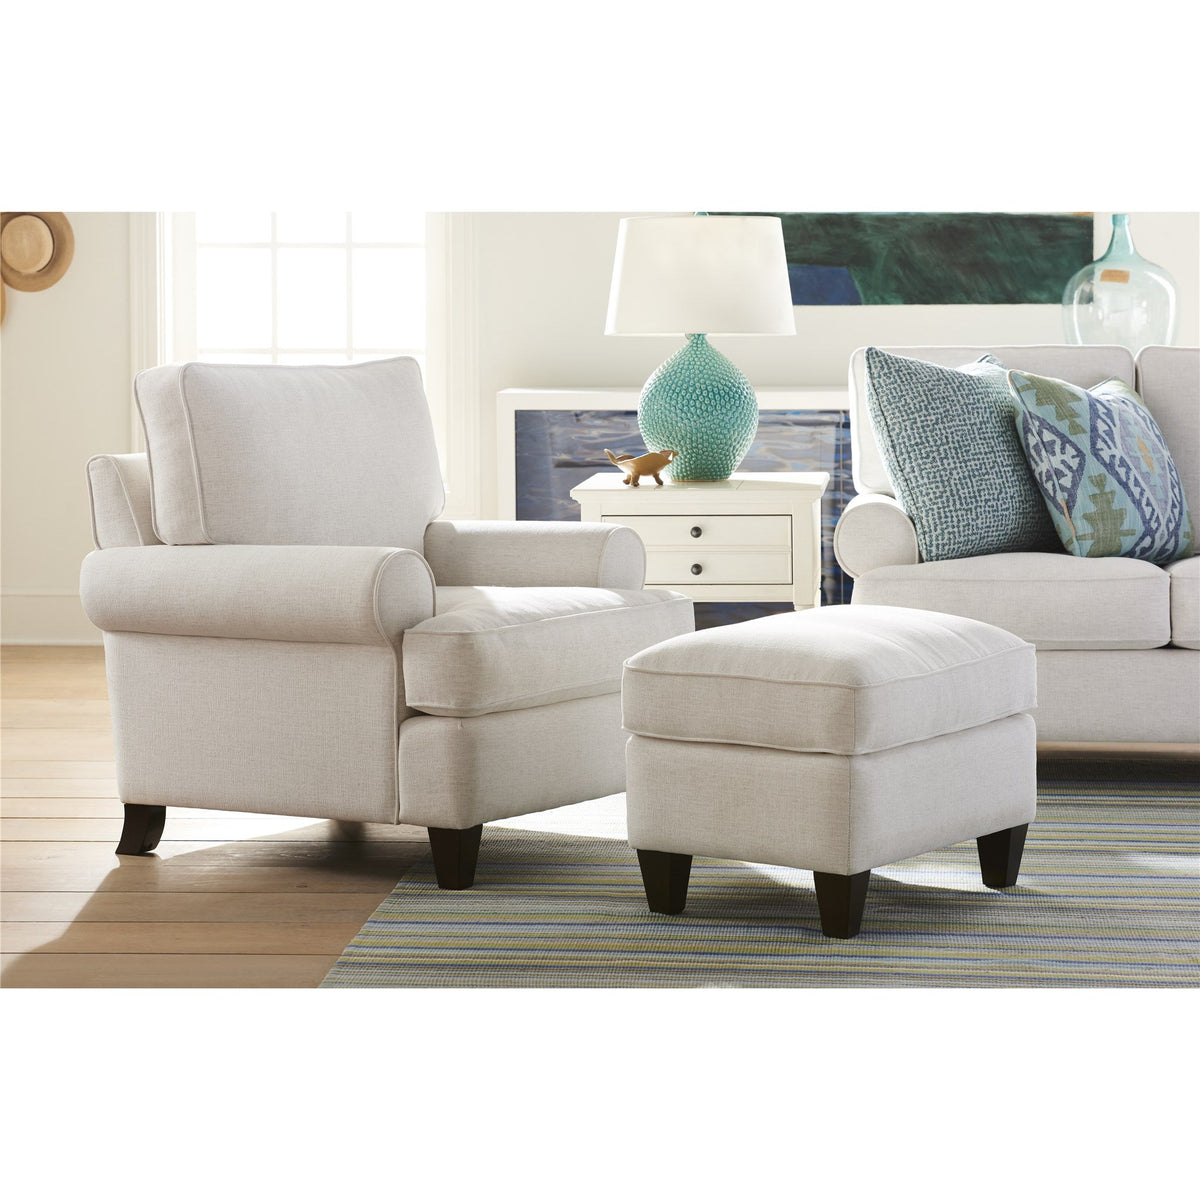 Blakely Chair Off White - Be Bold Furniture